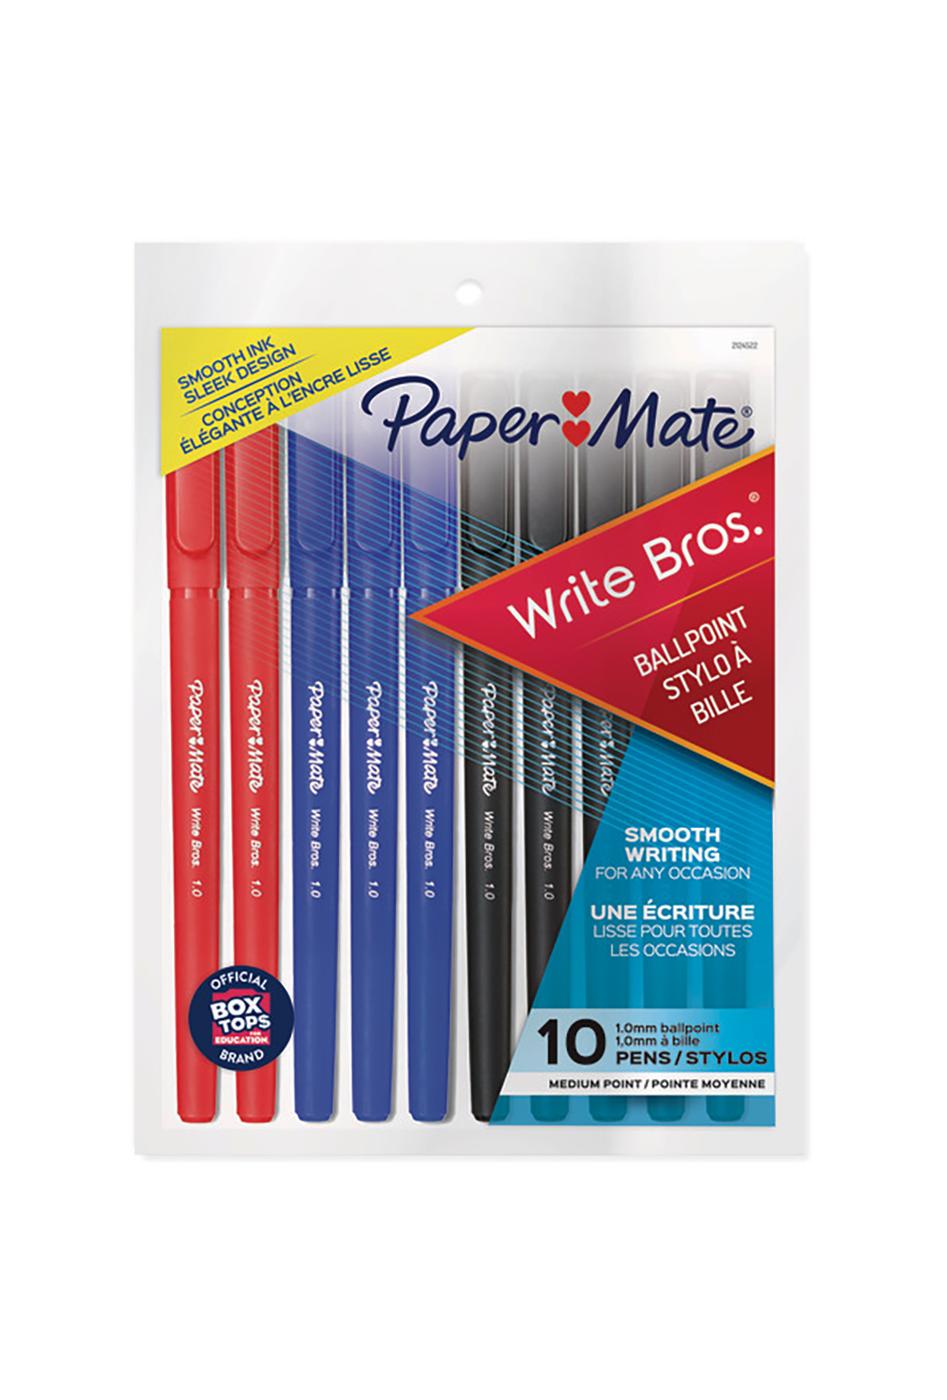 Paper Mate® Inkjoy® Ballpoint Stylo-Bille Ultra Smooth Assorted